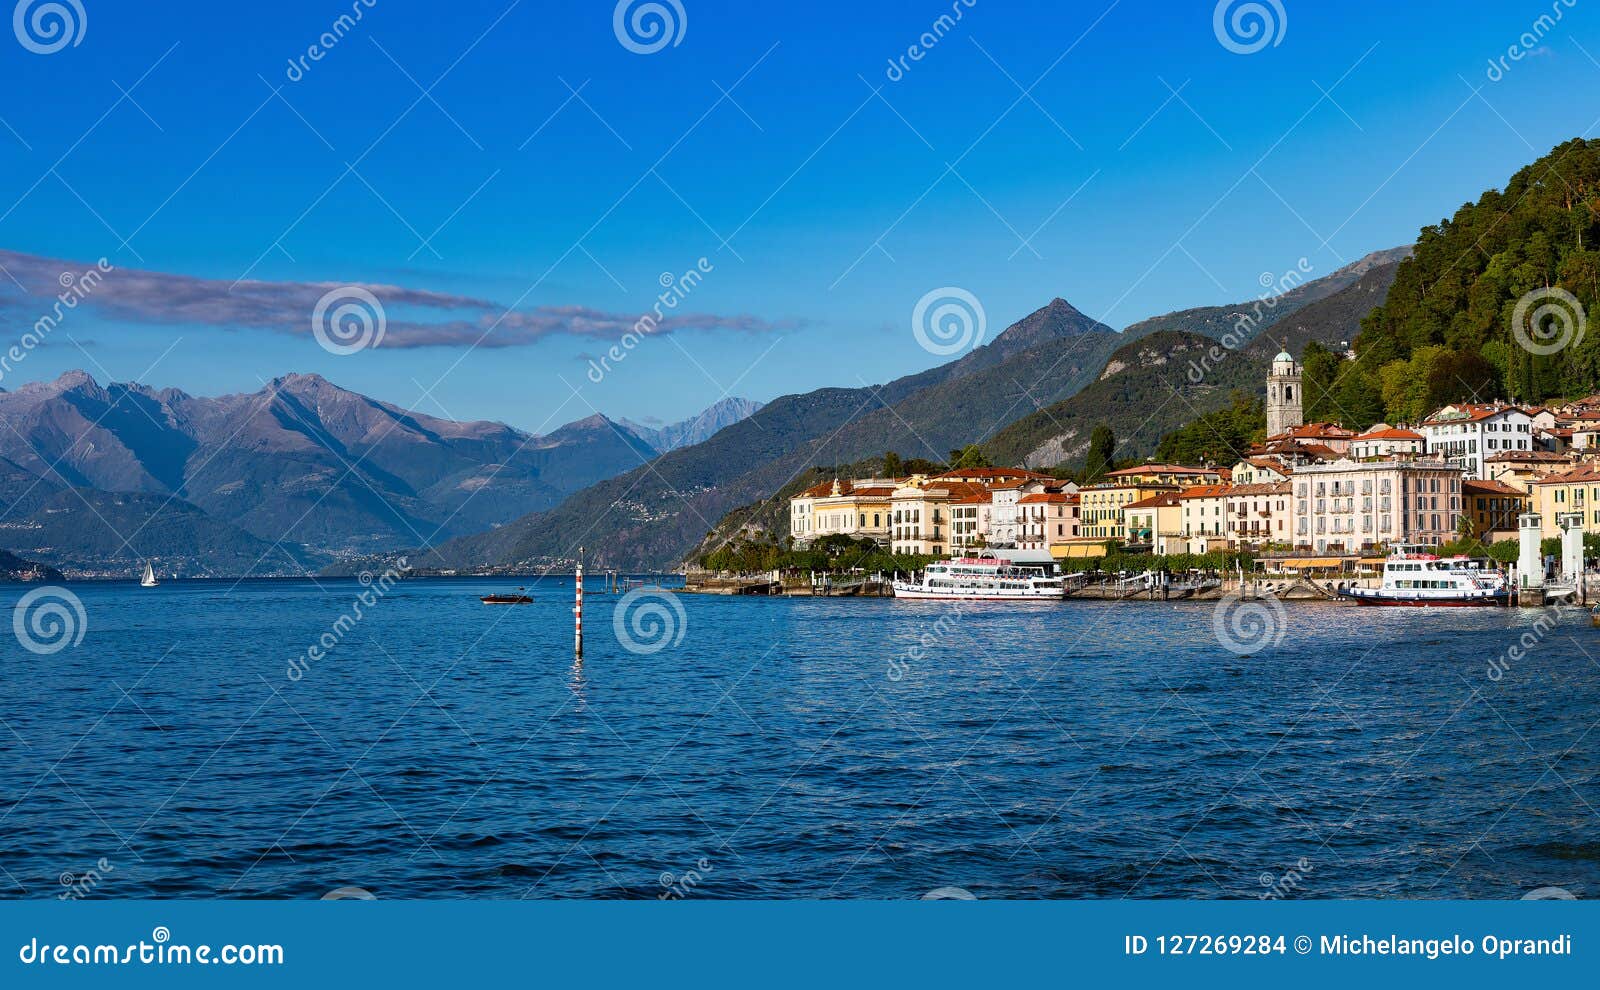 view of bellagio on the lake of cono in italy